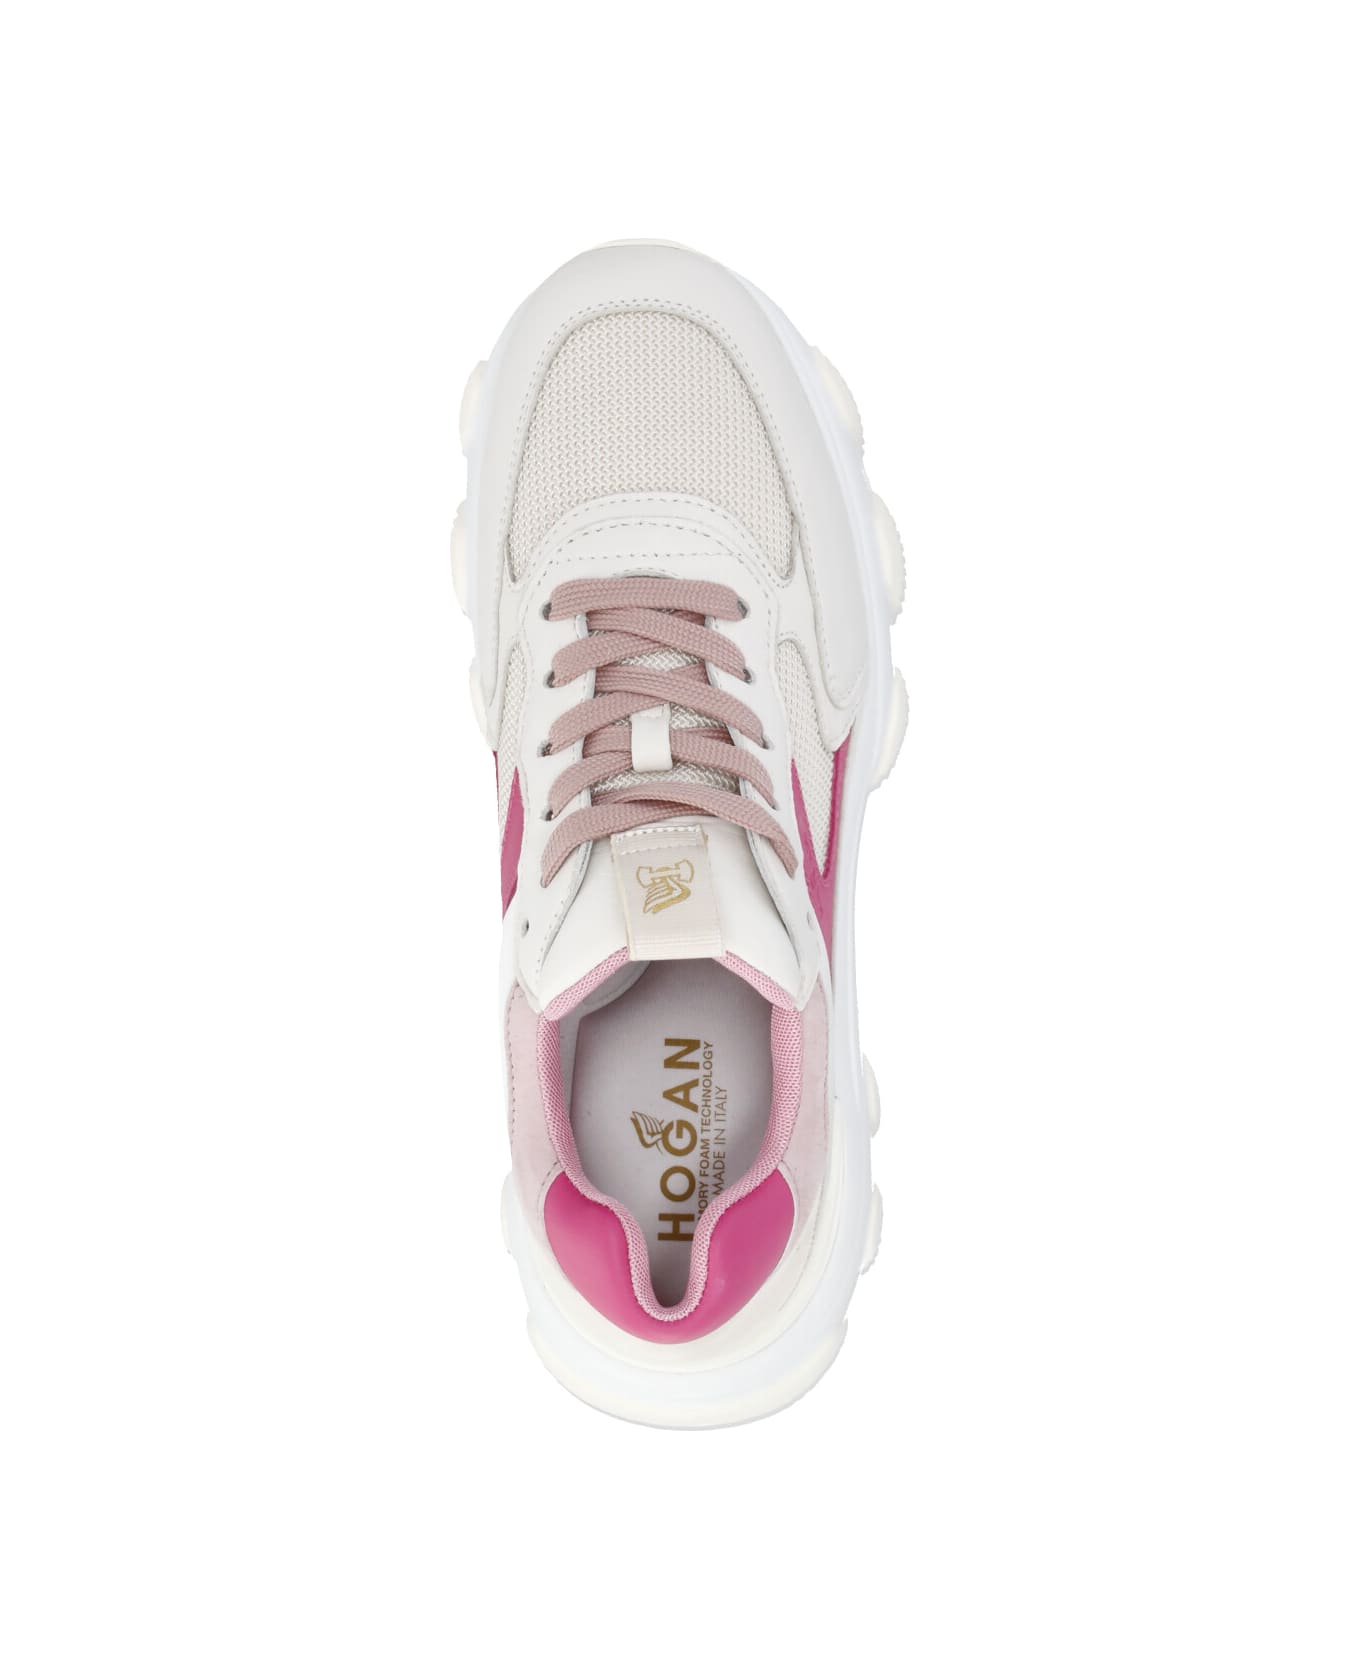 Hogan Hyperactive Leather Sneakers - White/pink